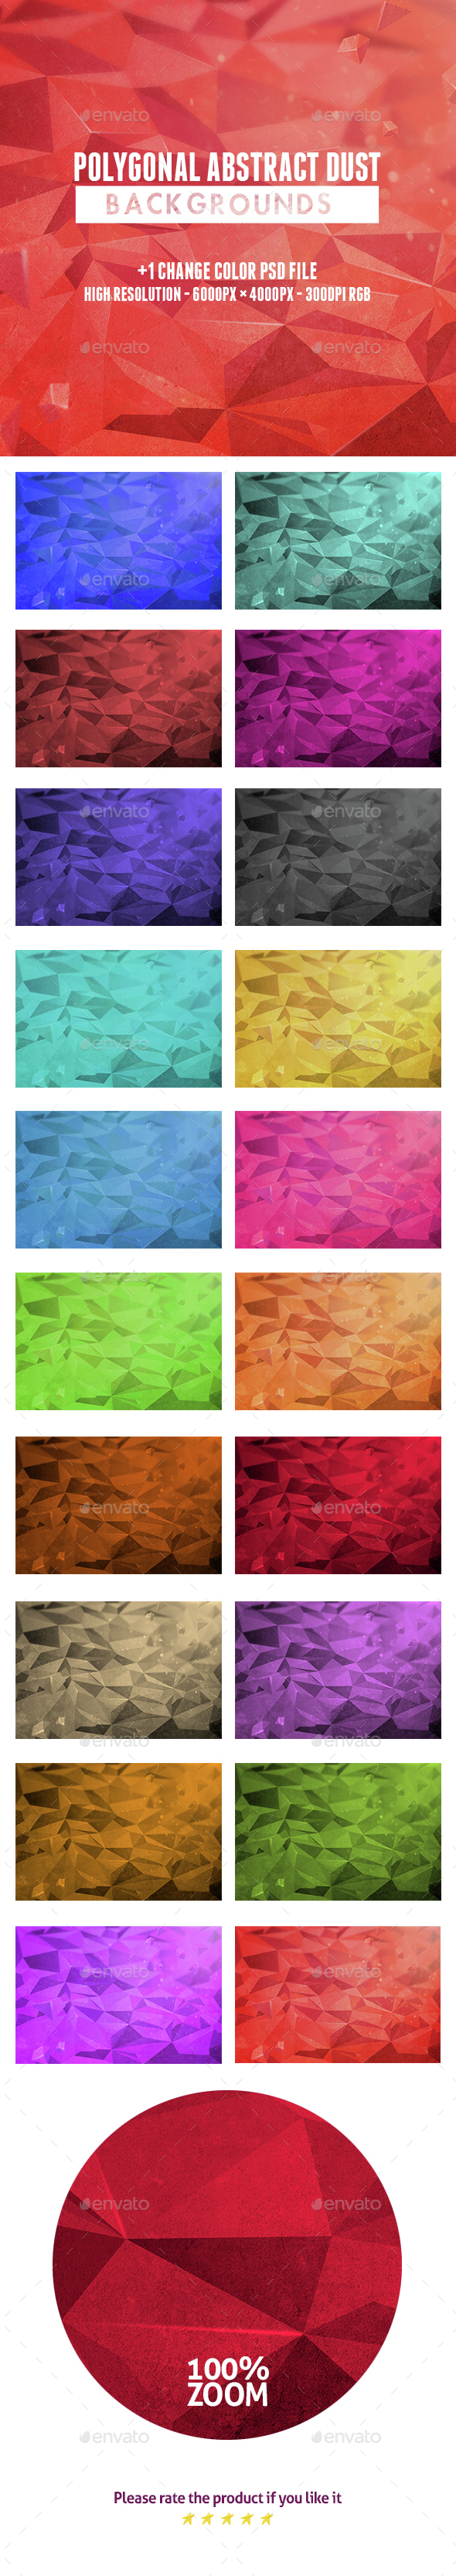 Polygonal Abstract Dust Backgrounds